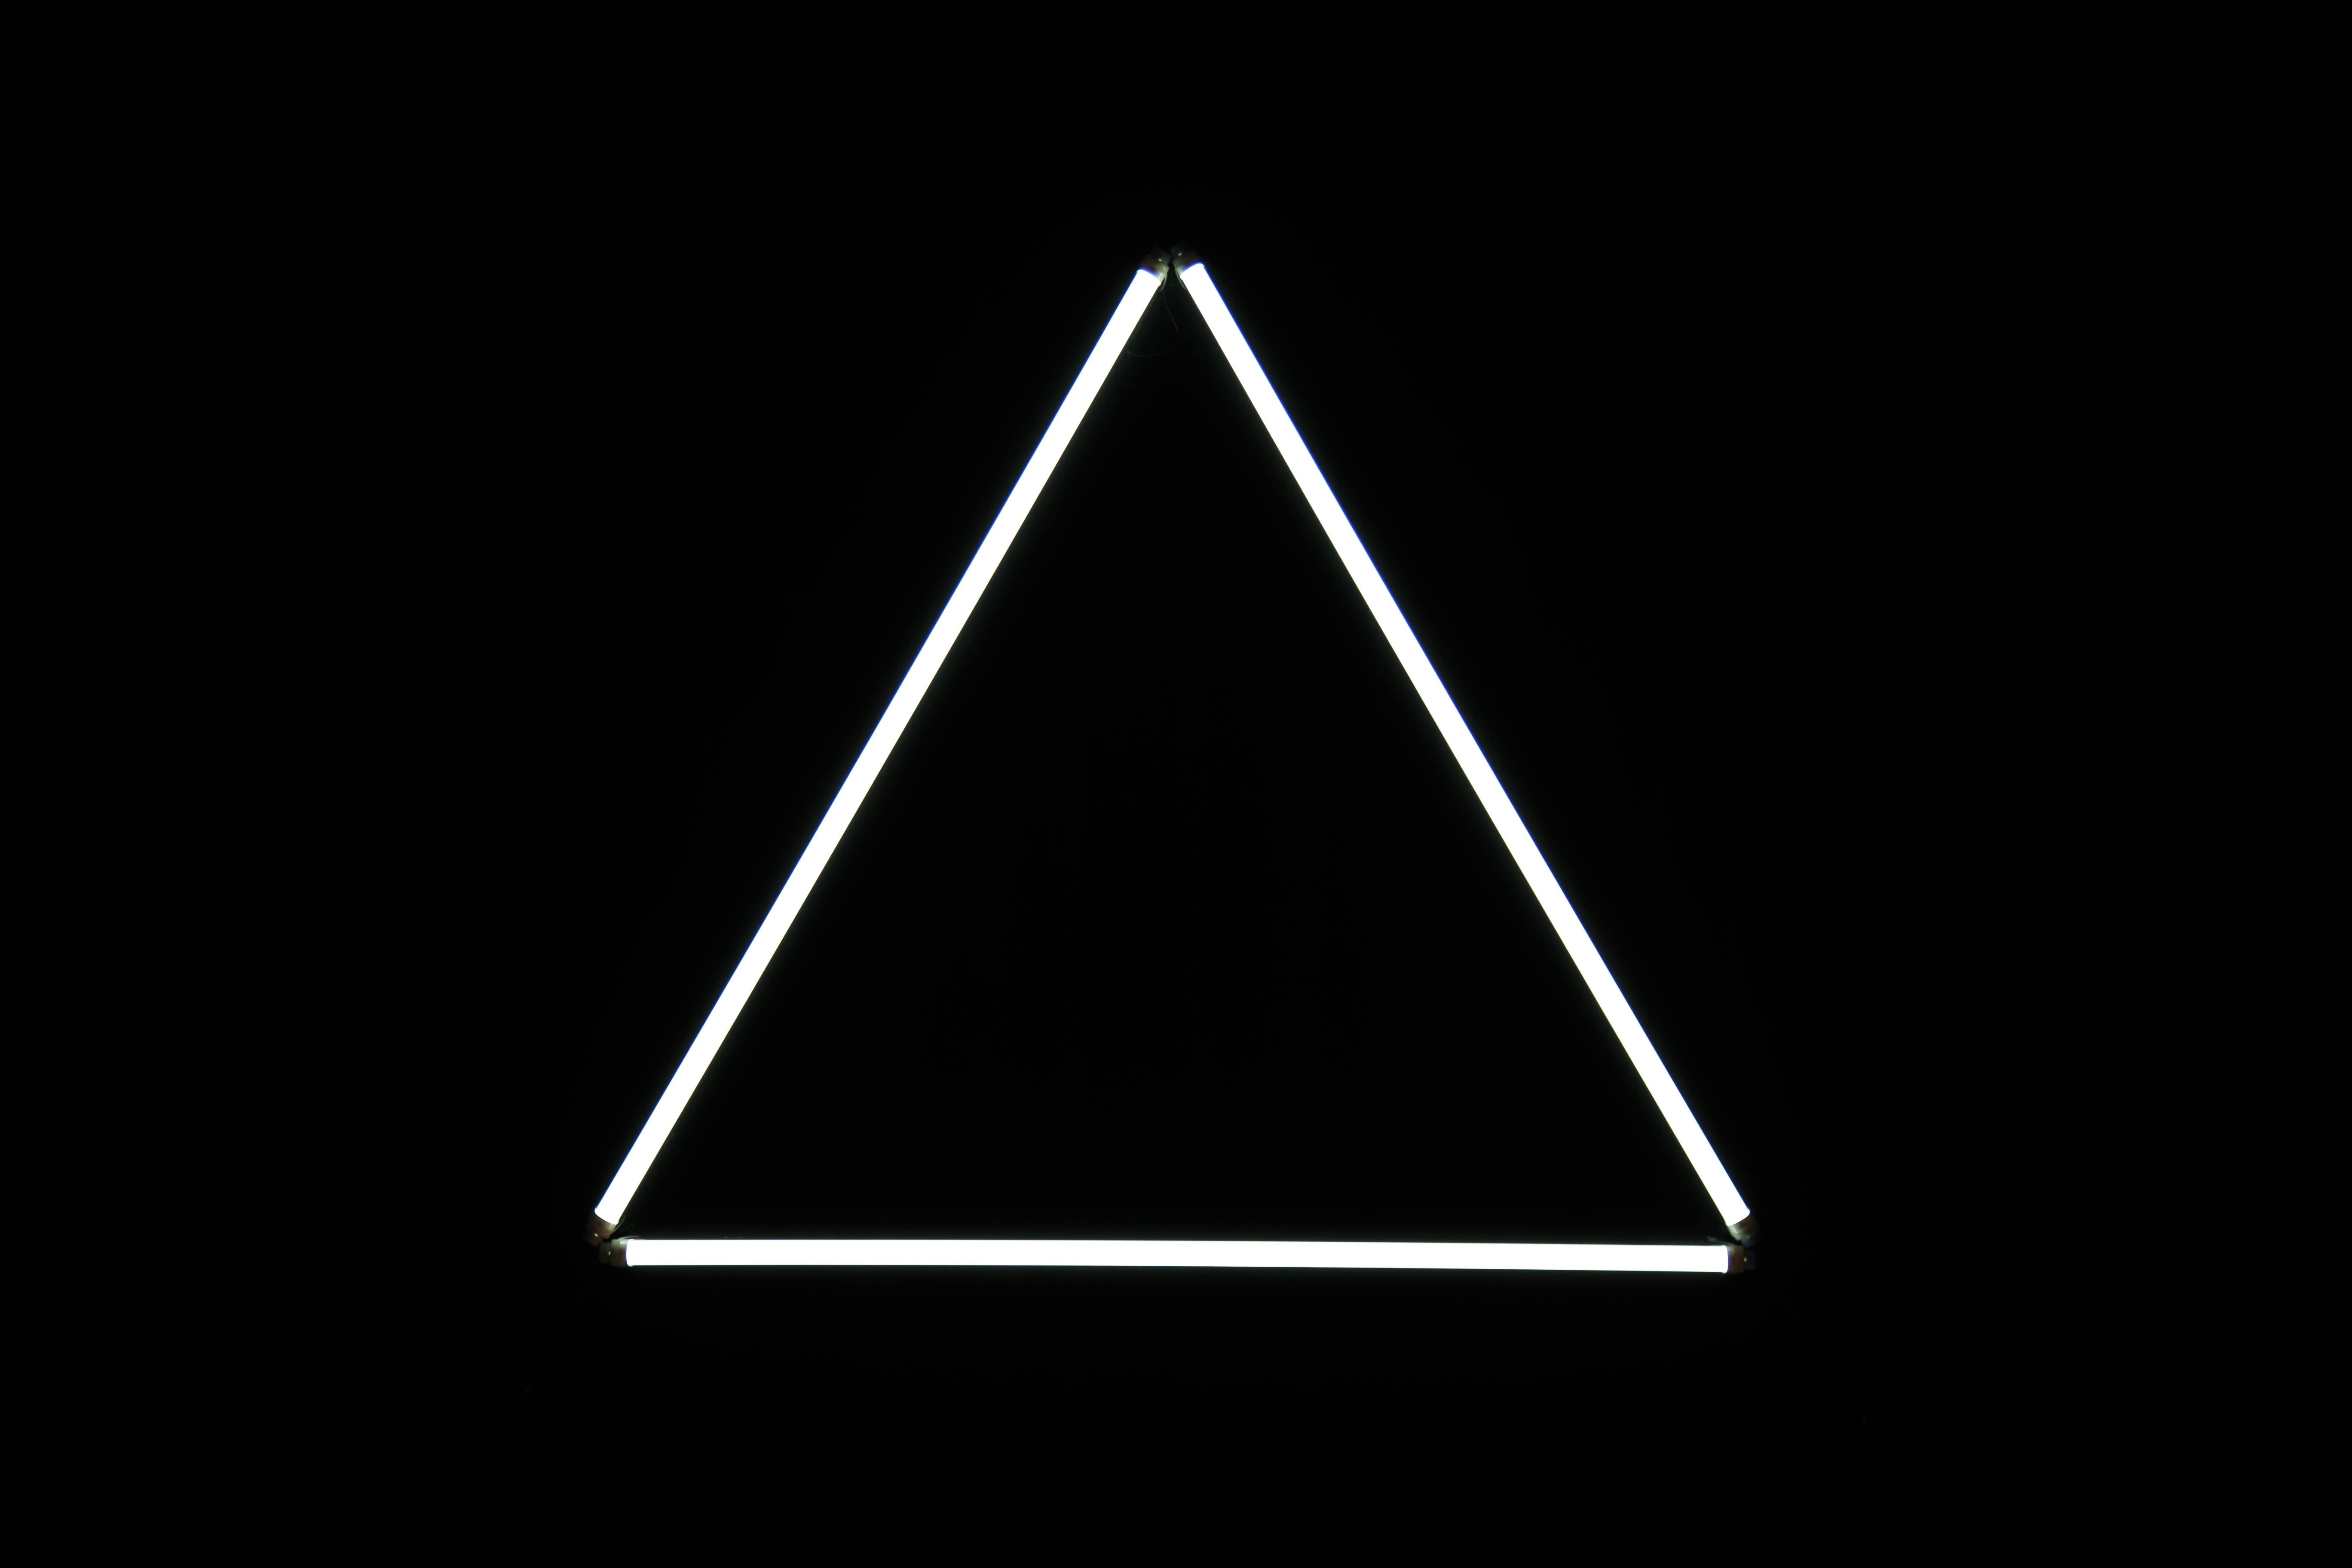 black and white triangle